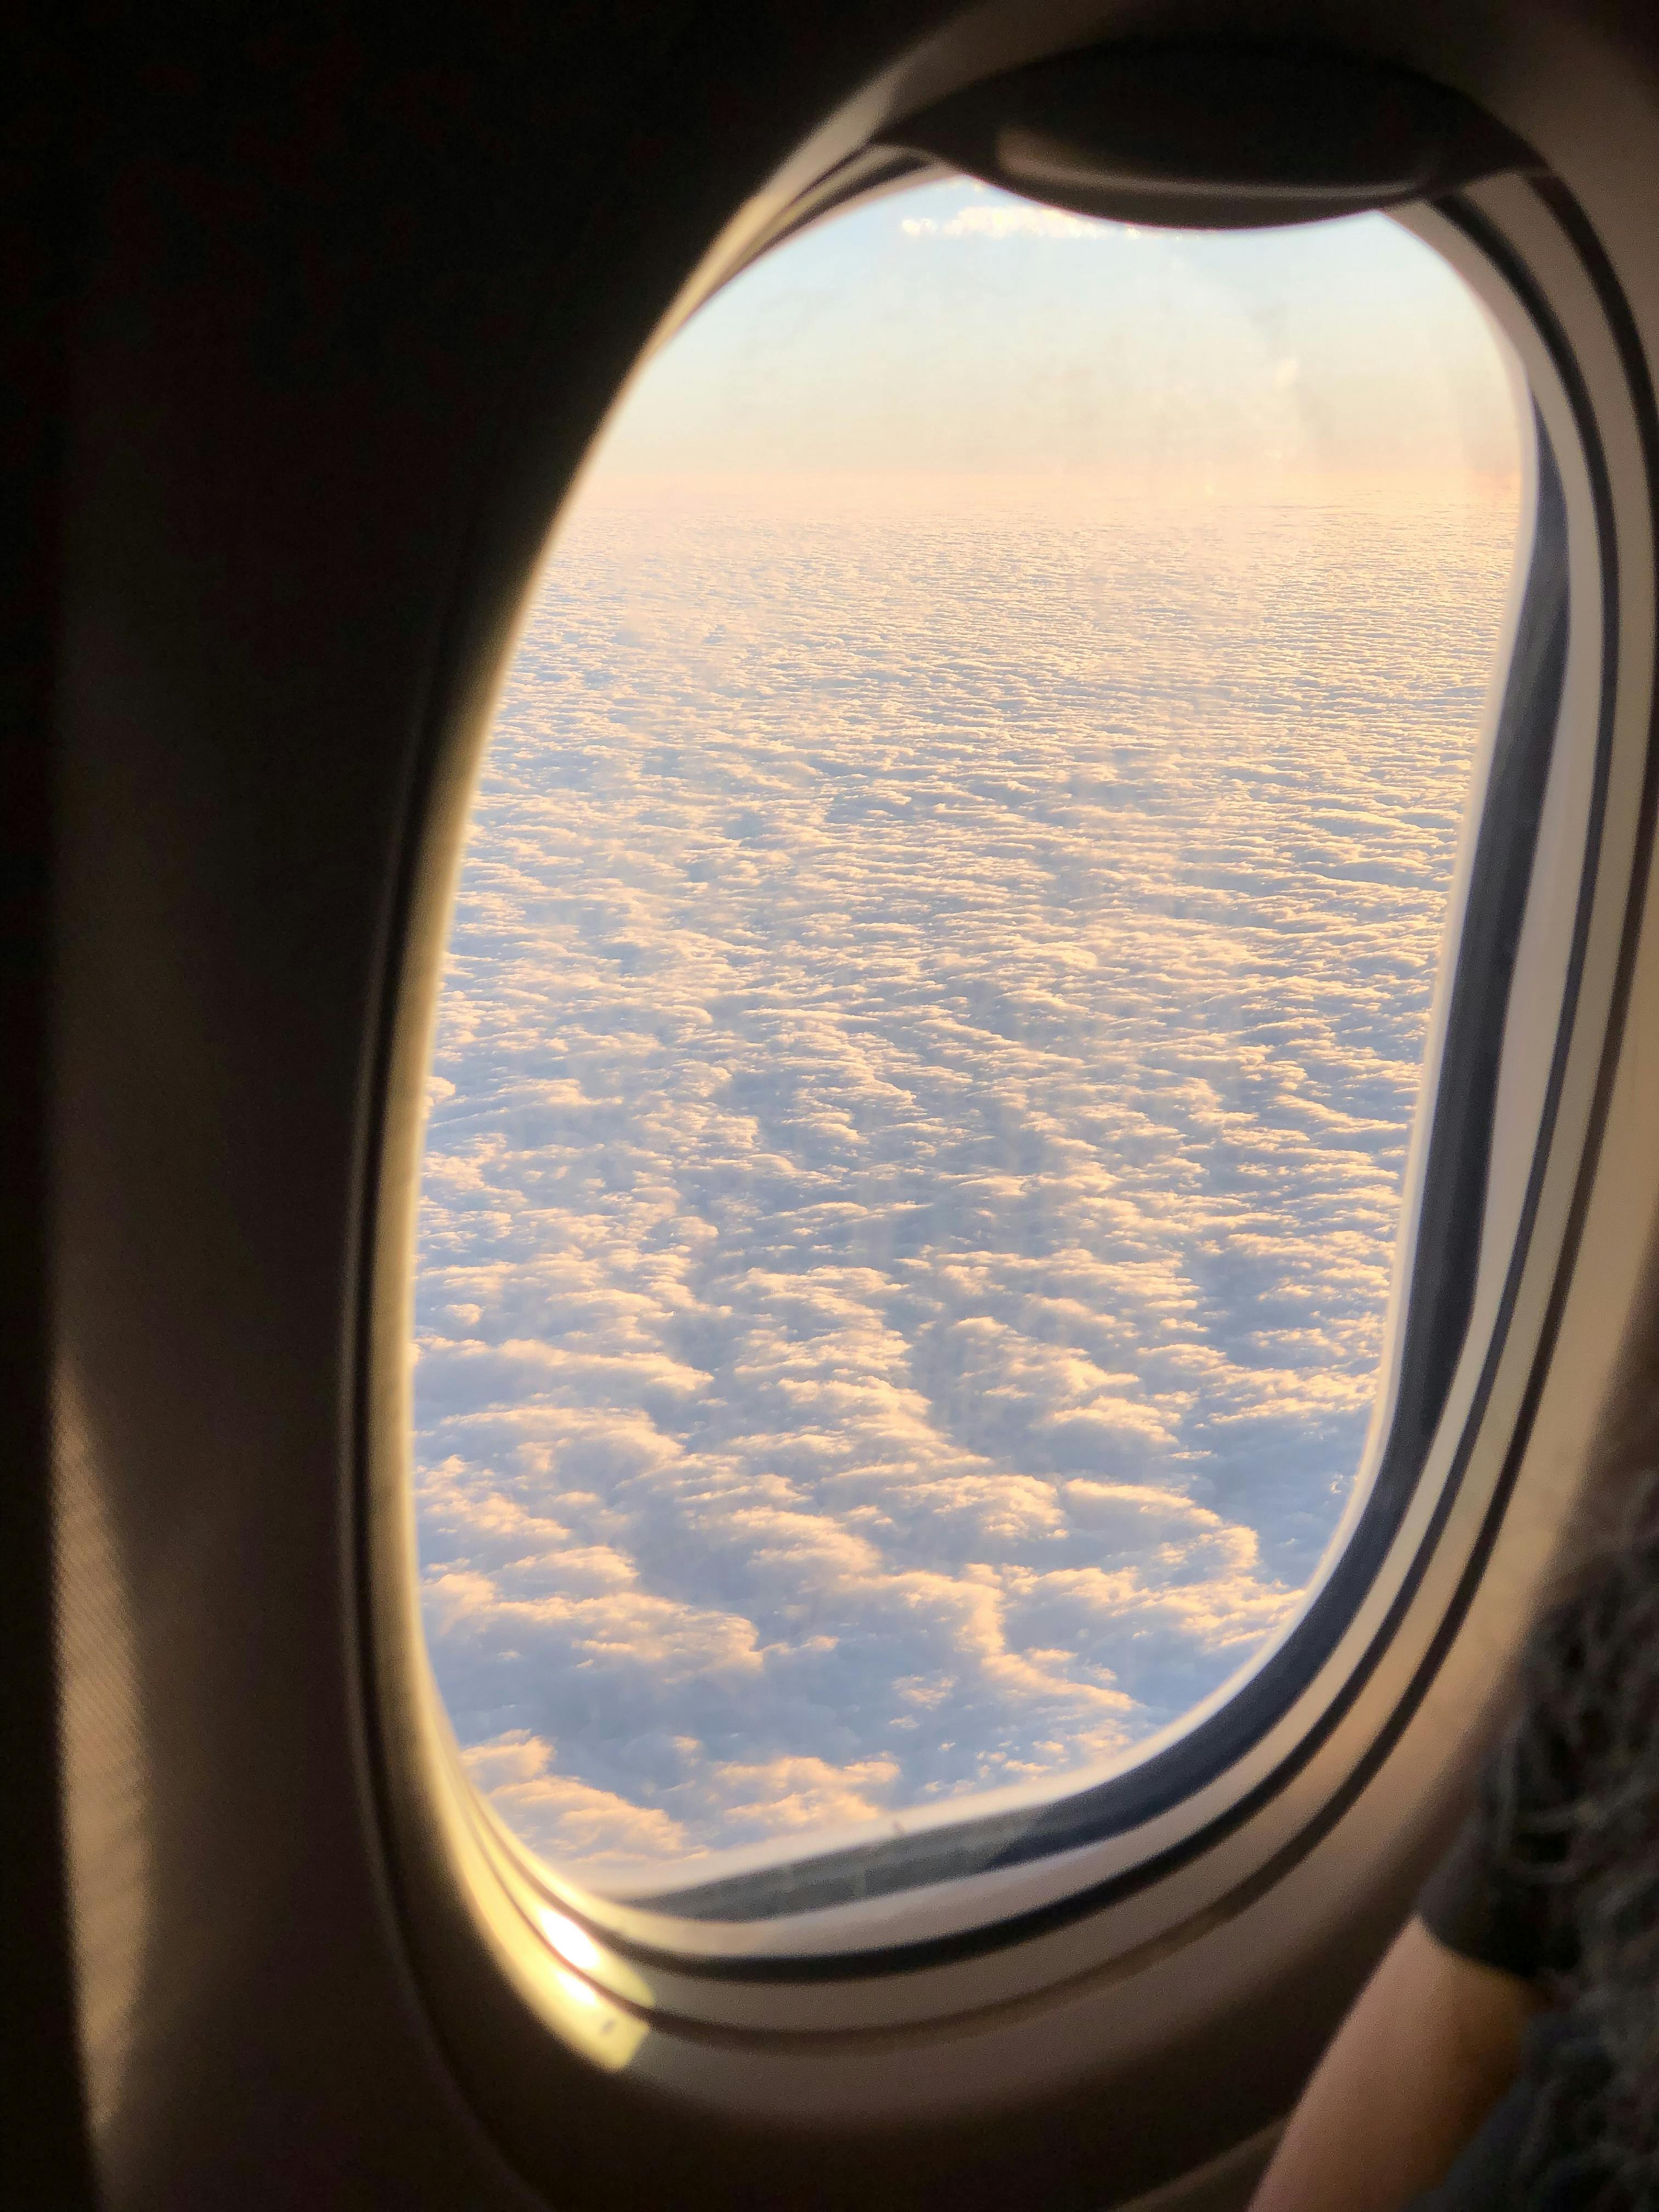 The view from an airplane window | Source: Pexels